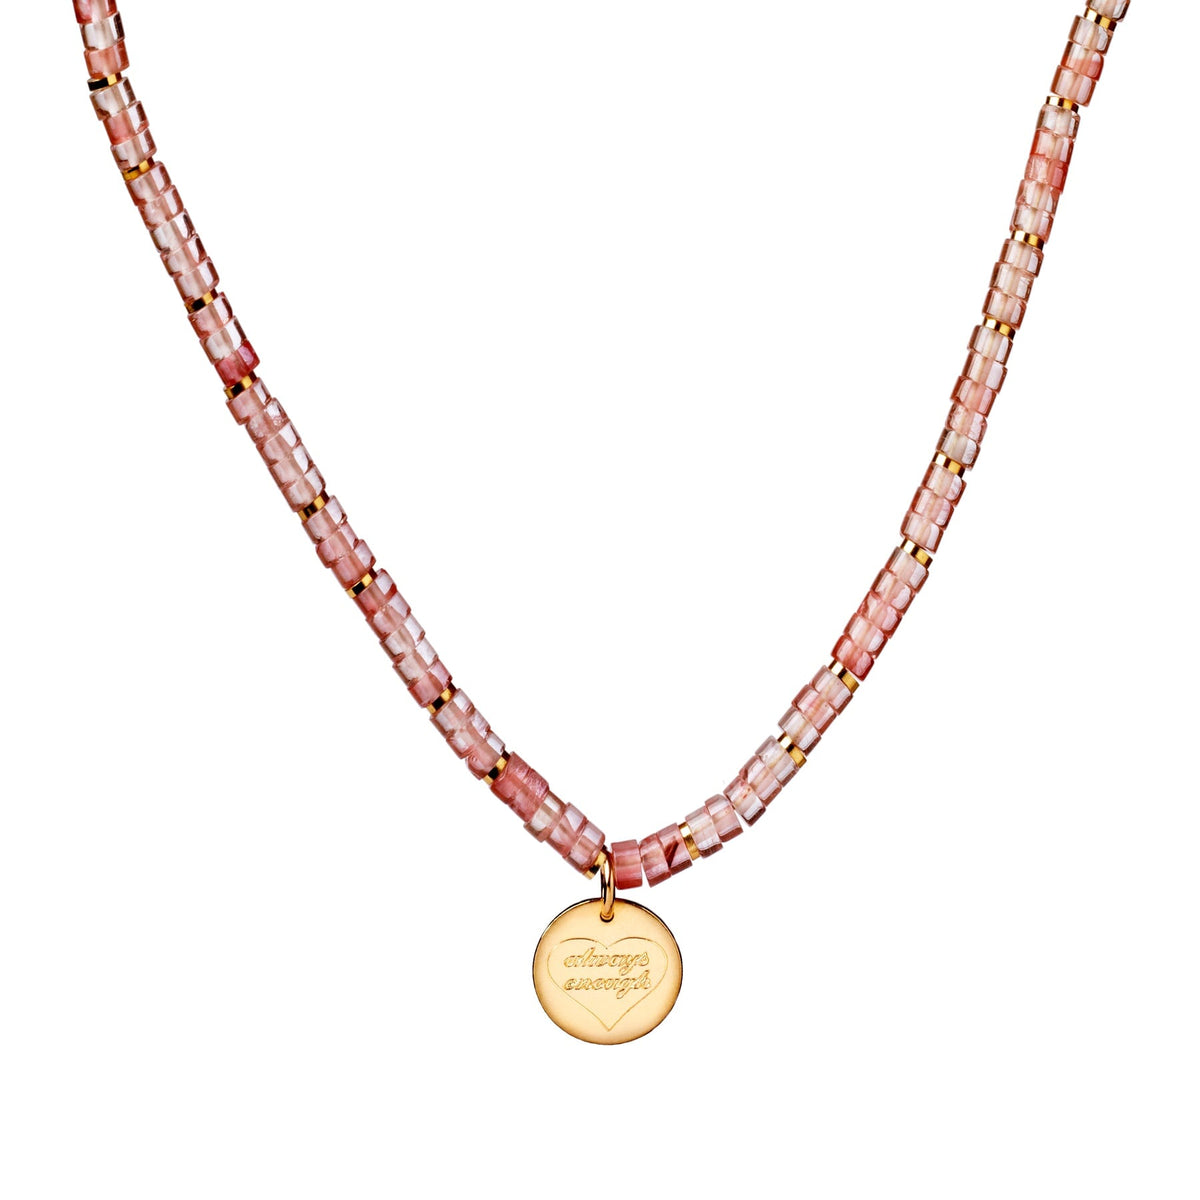 Spencer Always Enough Charm Necklace